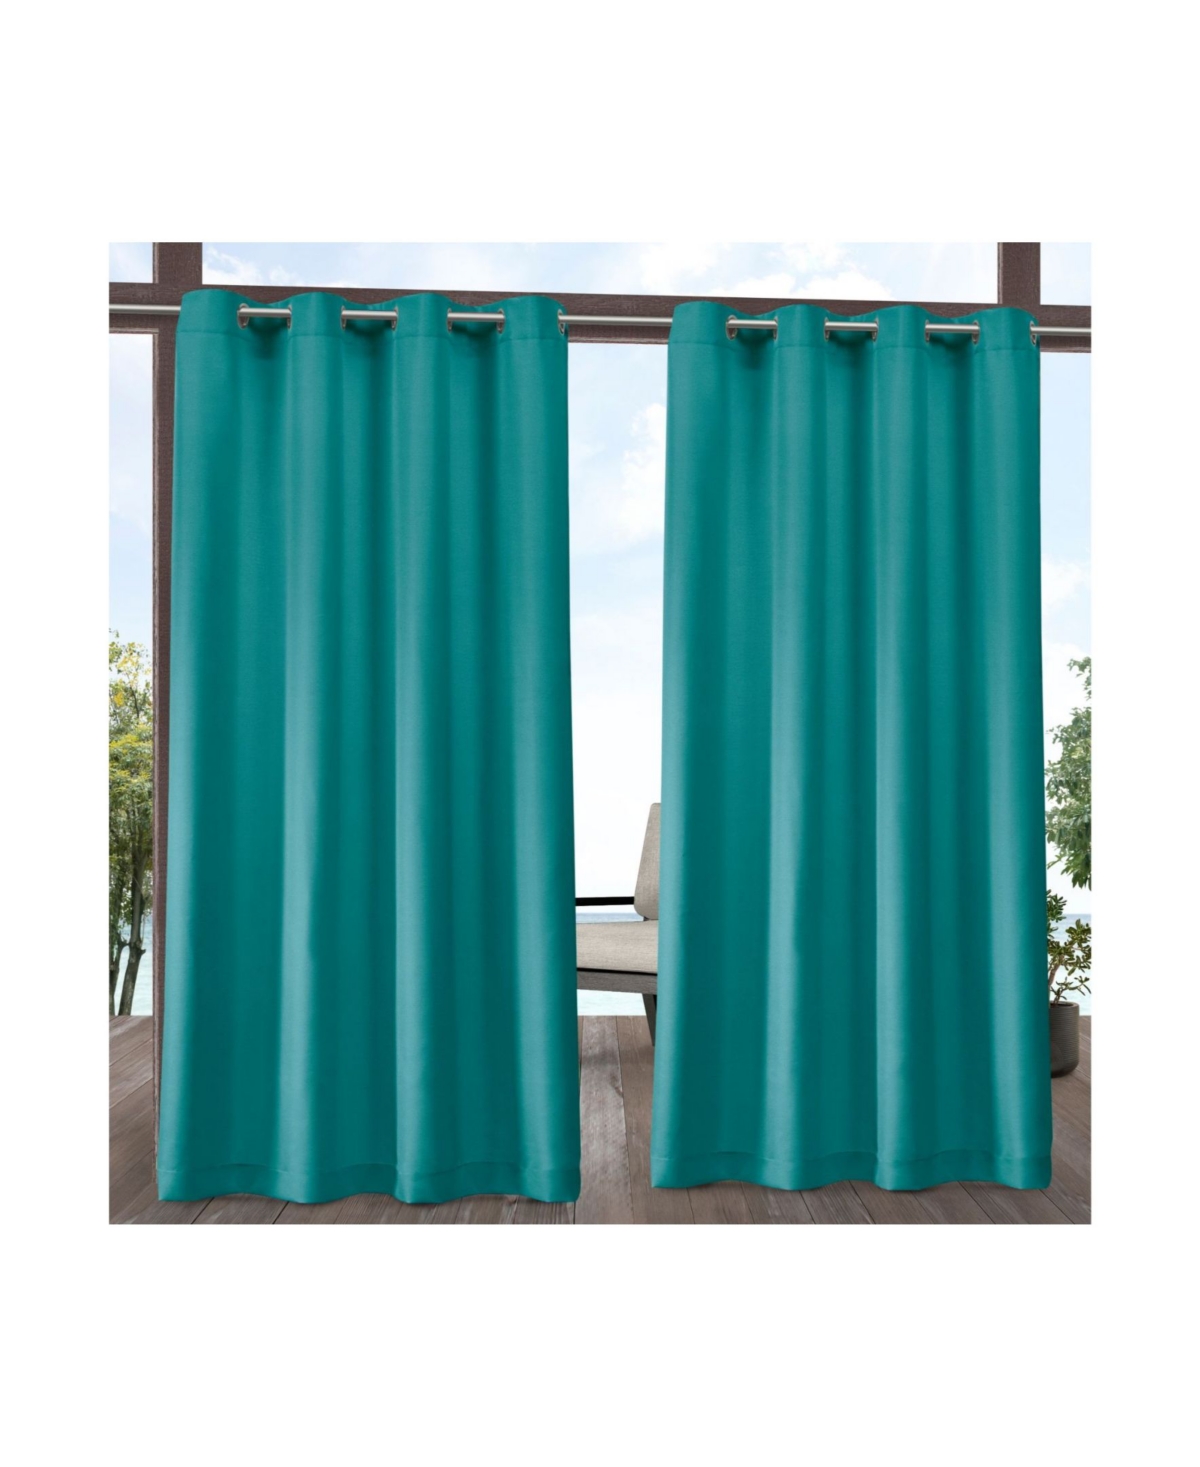 Curtains Indoor - Outdoor Solid Cabana Grommet Top Curtain Panel Pair, 54" x 96" - Green